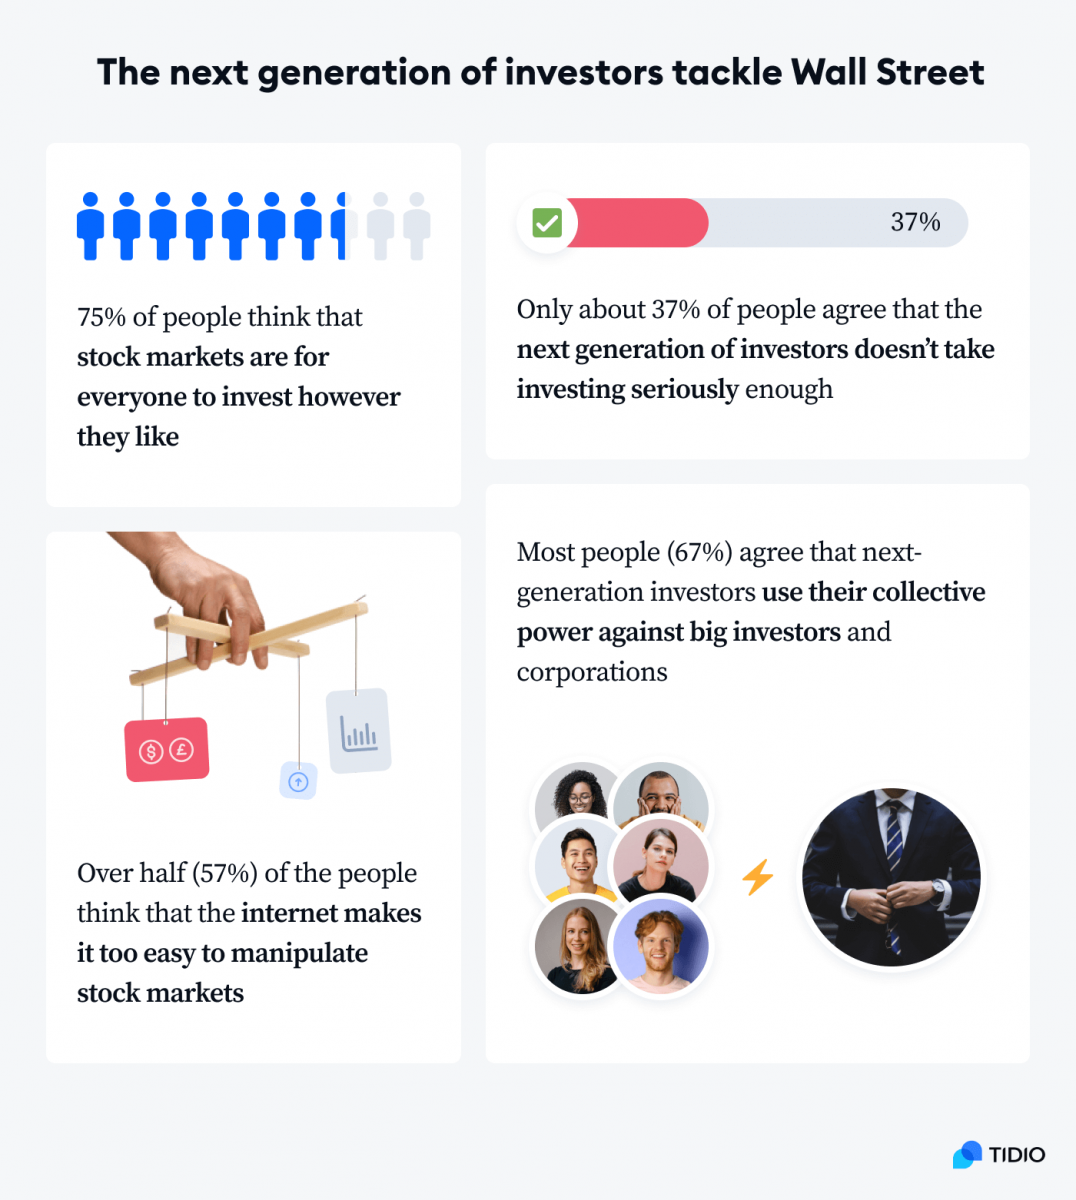 Infographic showing stats on the next generation of investors tackling Wall Street in 2021